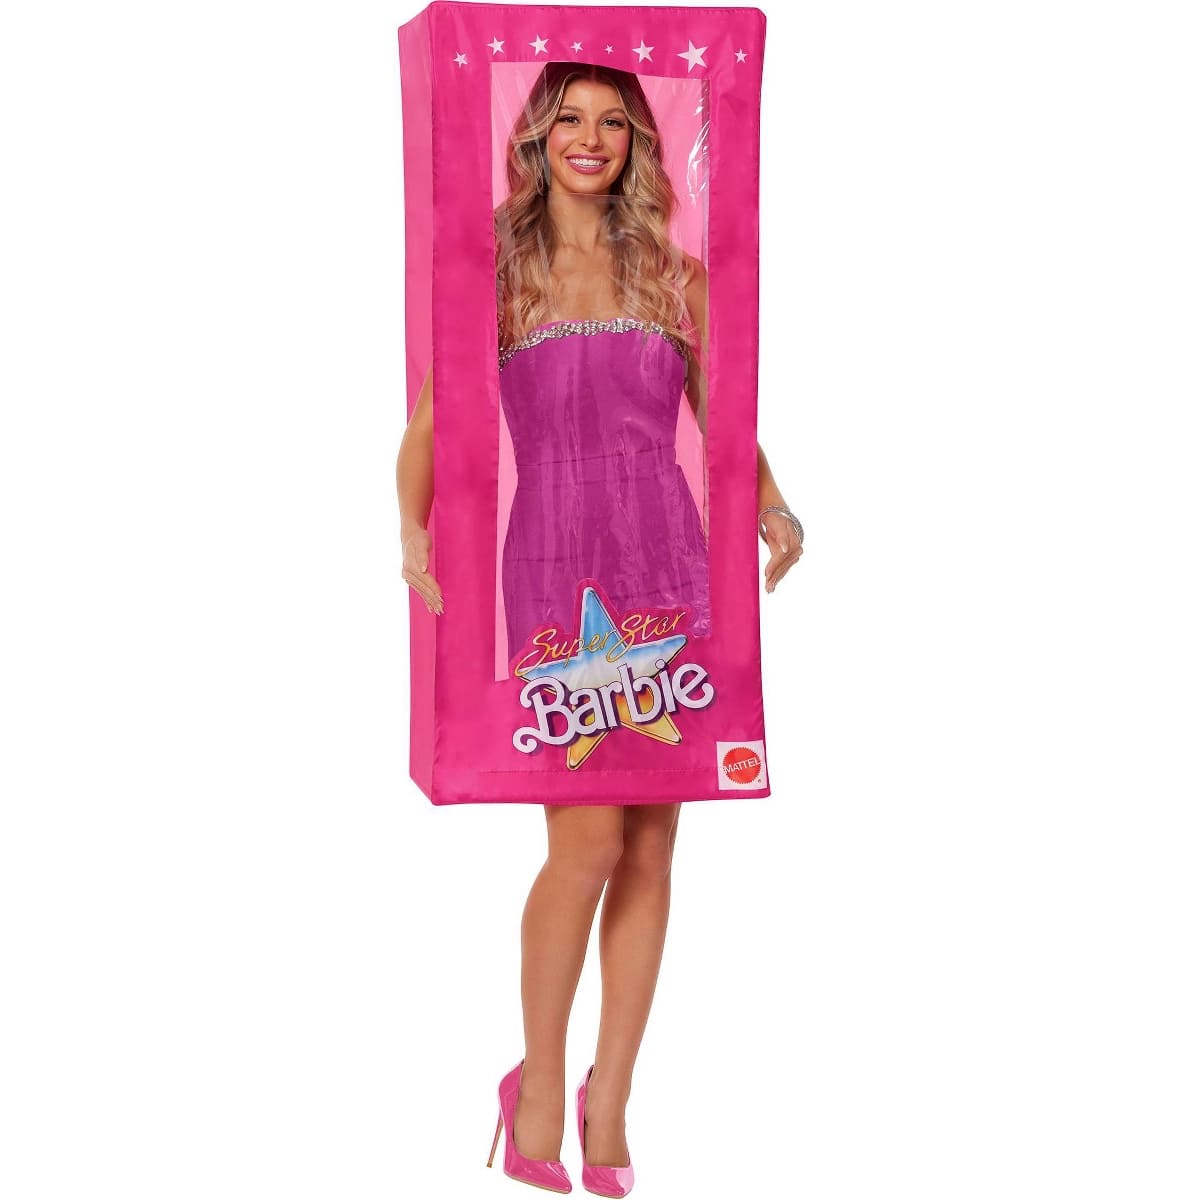 Adult Barbie Doll Box Halloween Costume One Size from Target